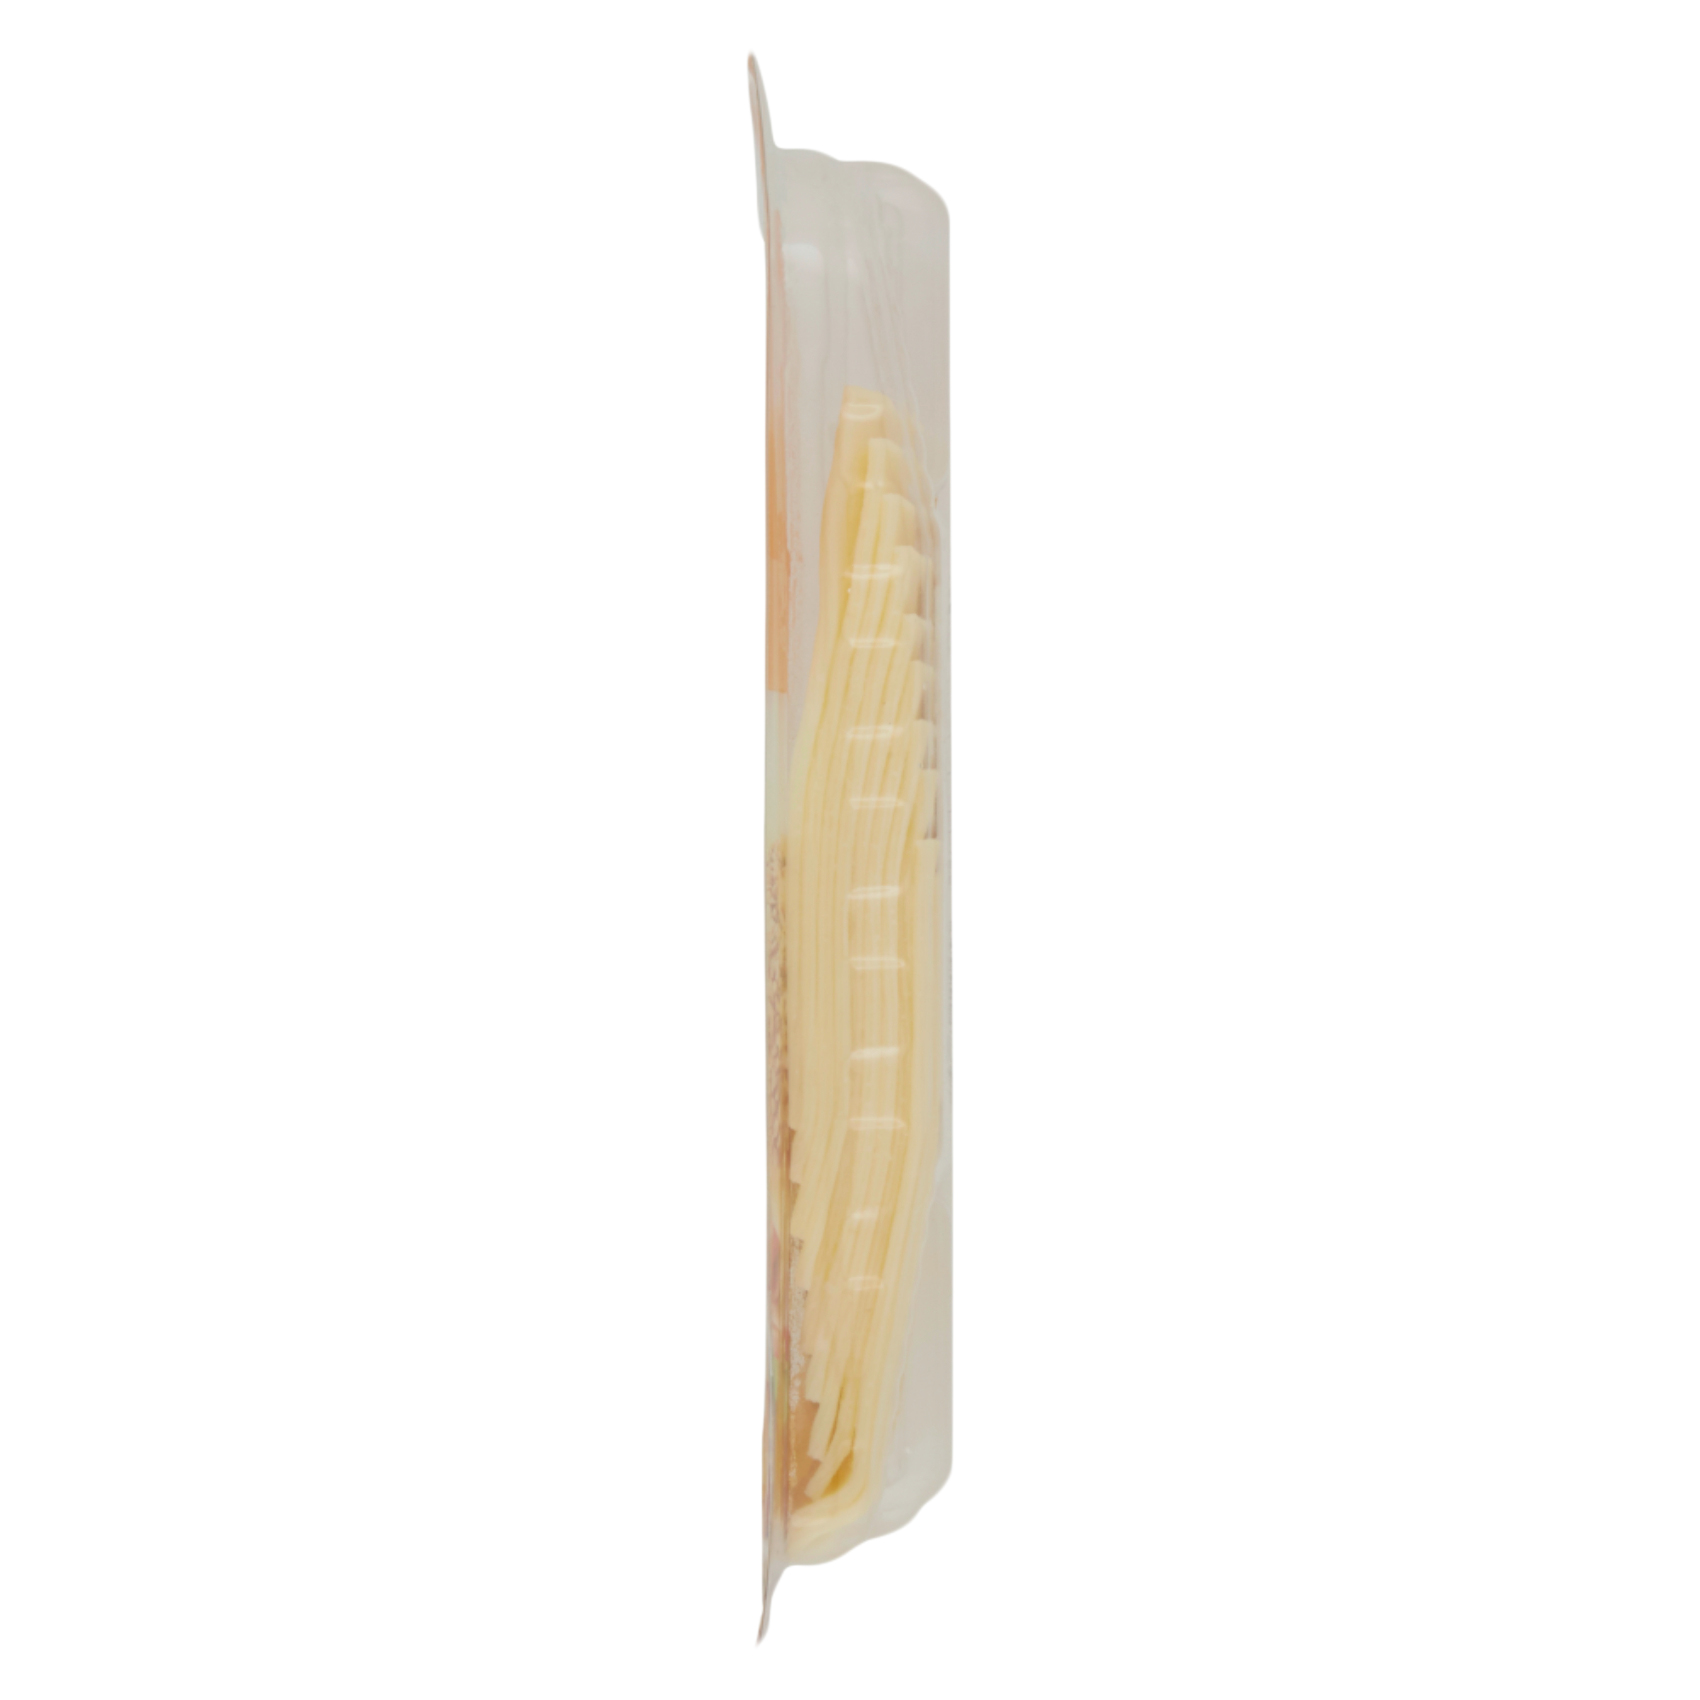 Carrefour Gouda Slices Cheese 200G